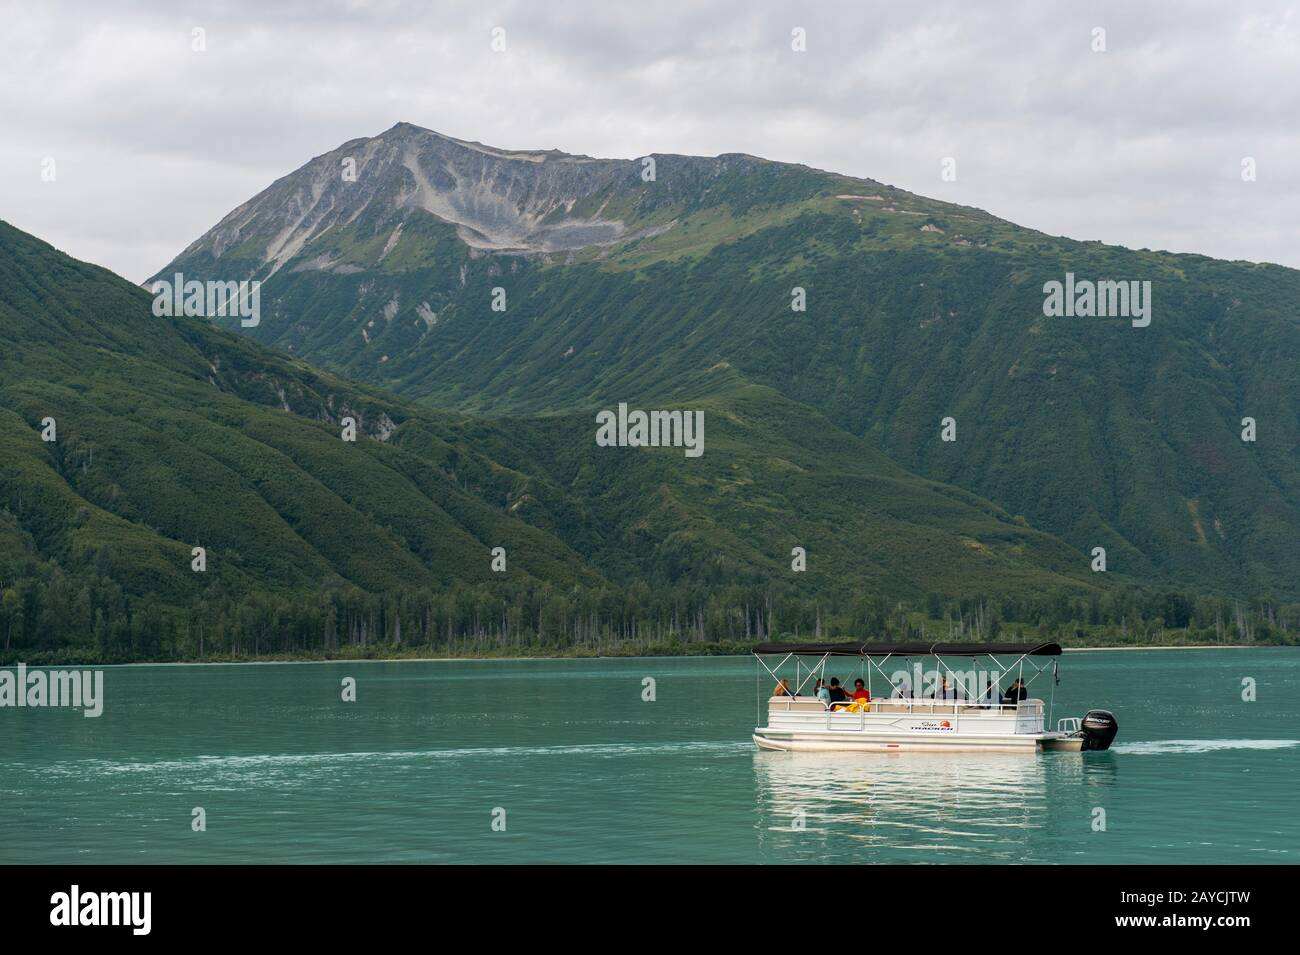 People in a boat on a day trip to see the brown bears at Lake Crescent in Lake Clark National Park and Preserve, Alaska, USA. Stock Photo